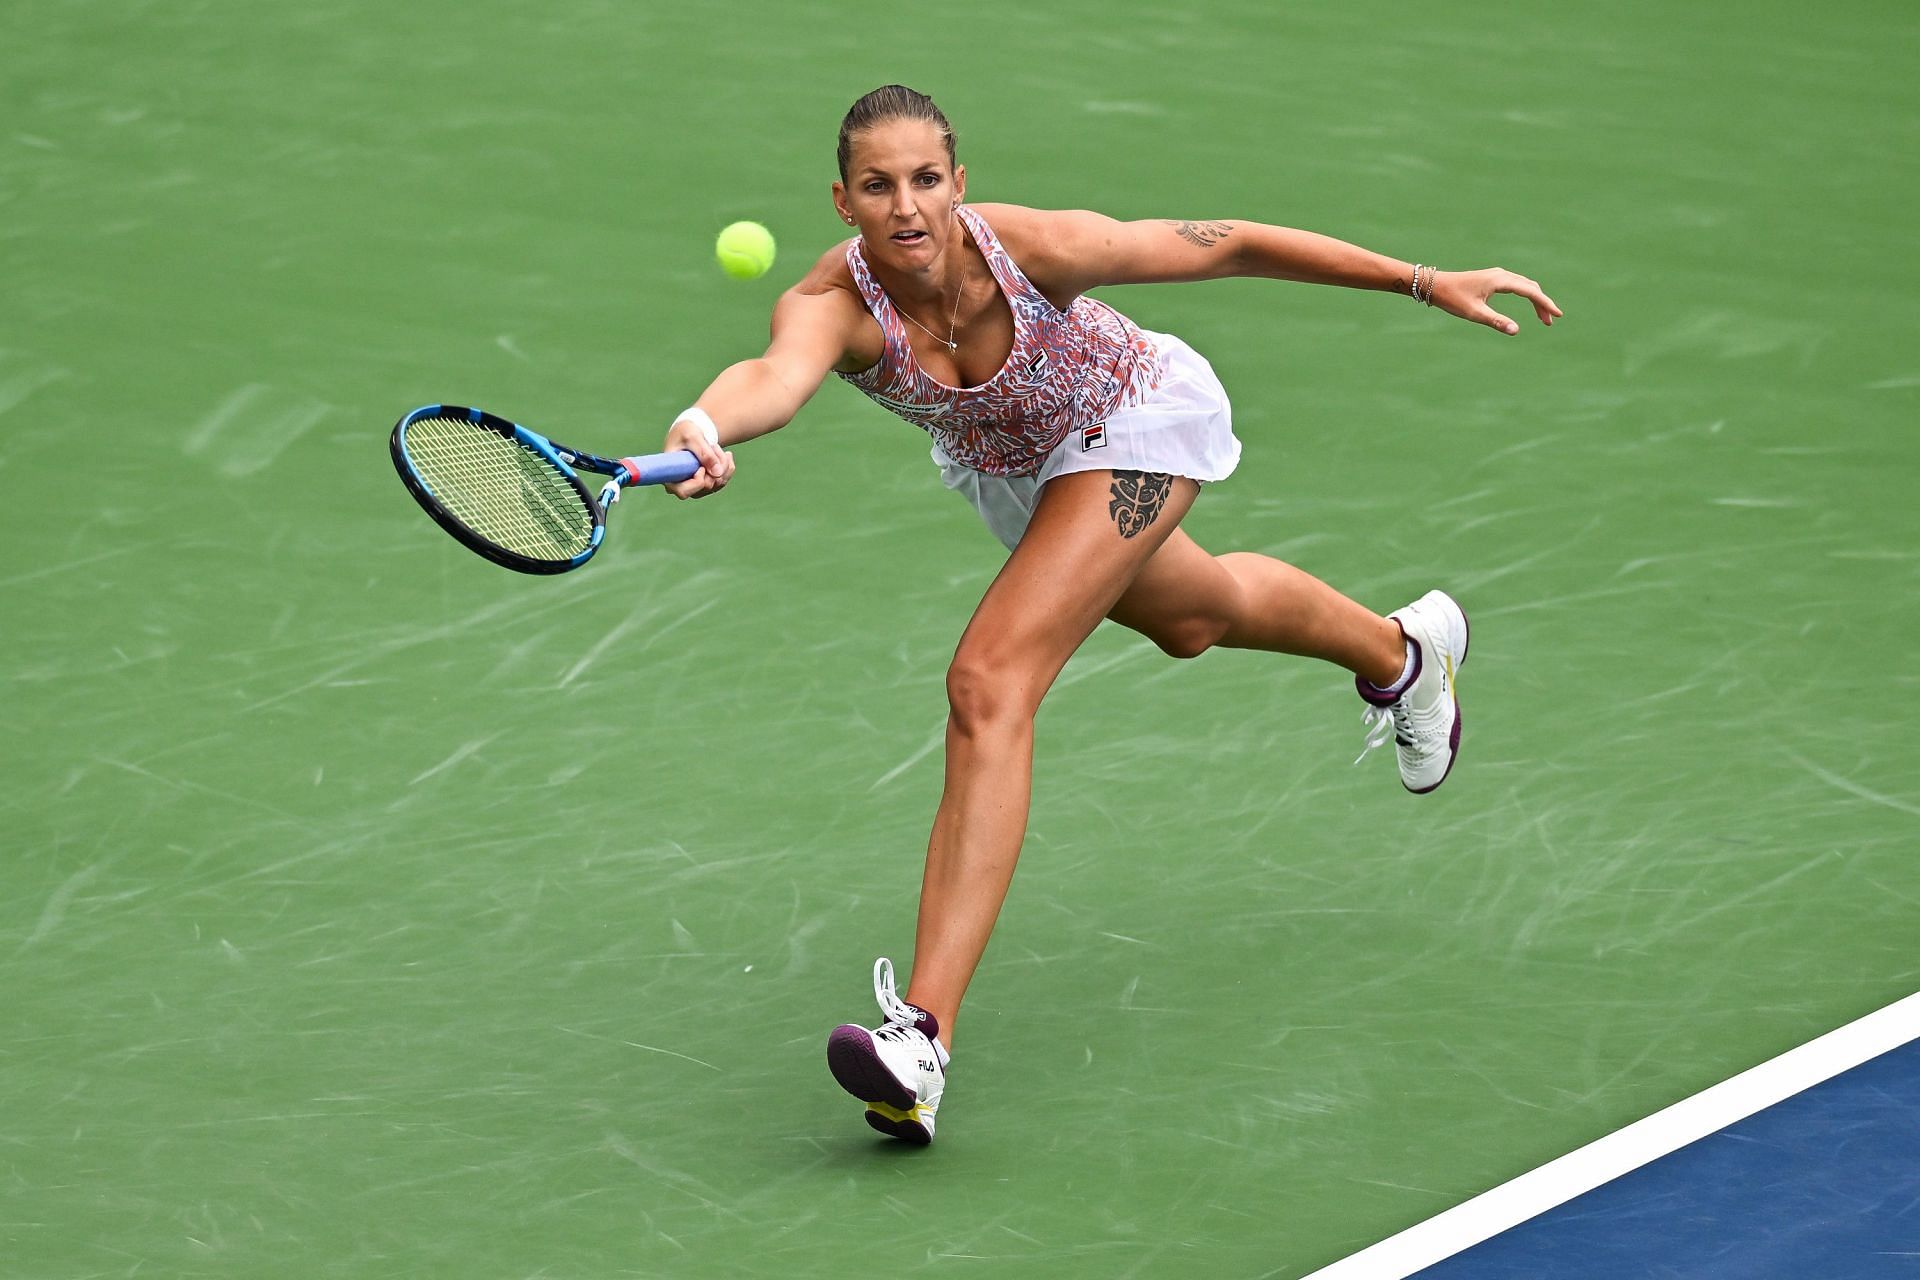 Serving numbers will be key for Pliskova.